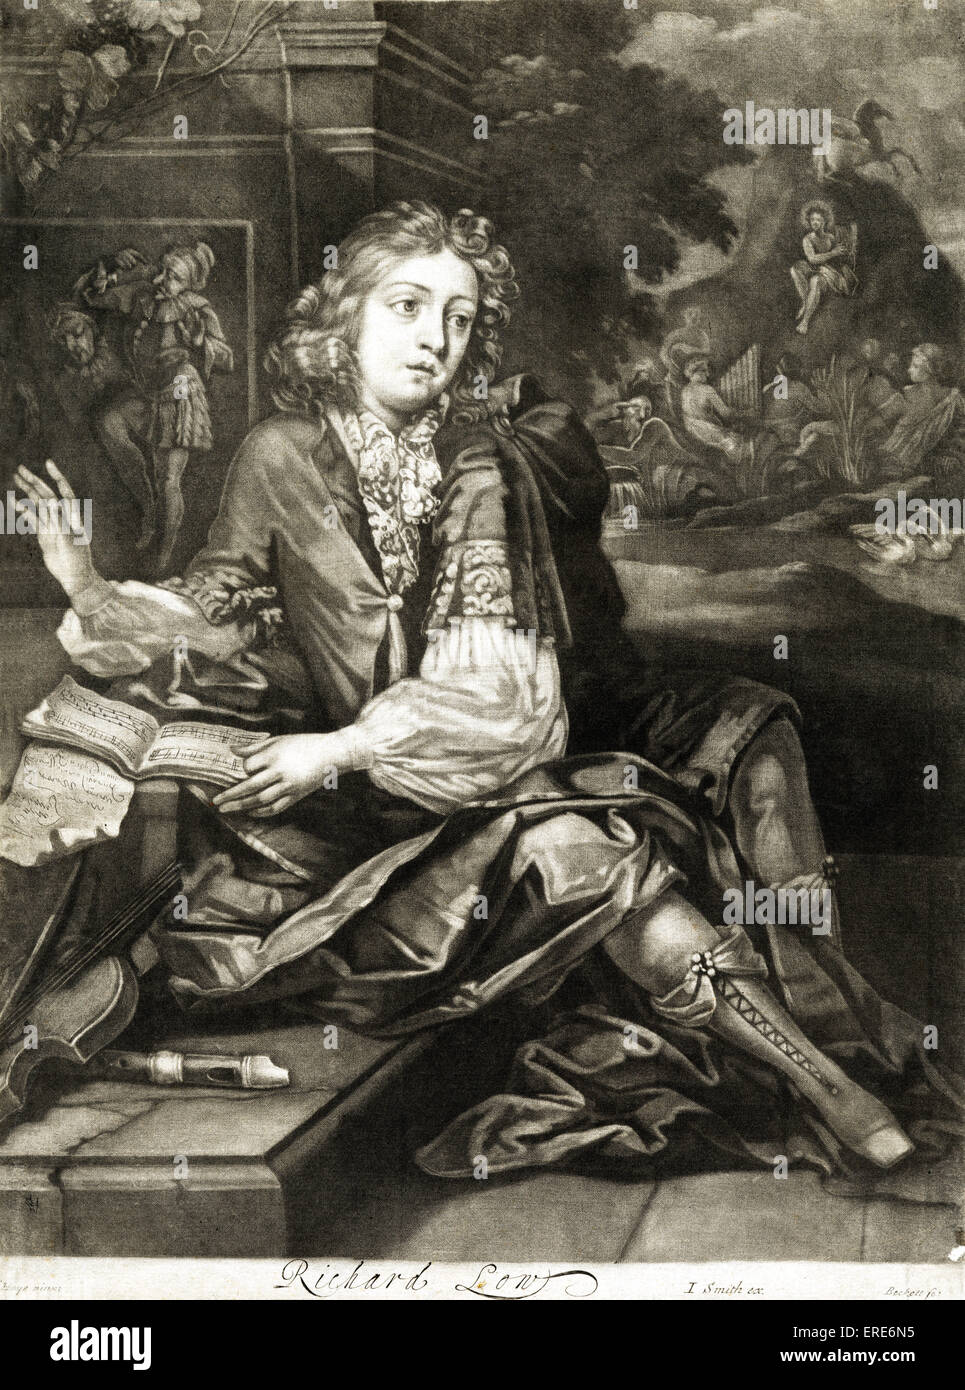 Richard Low with a music book, violin and recorder.   Mezzotint, 17th century. English, allegorical. Stock Photo